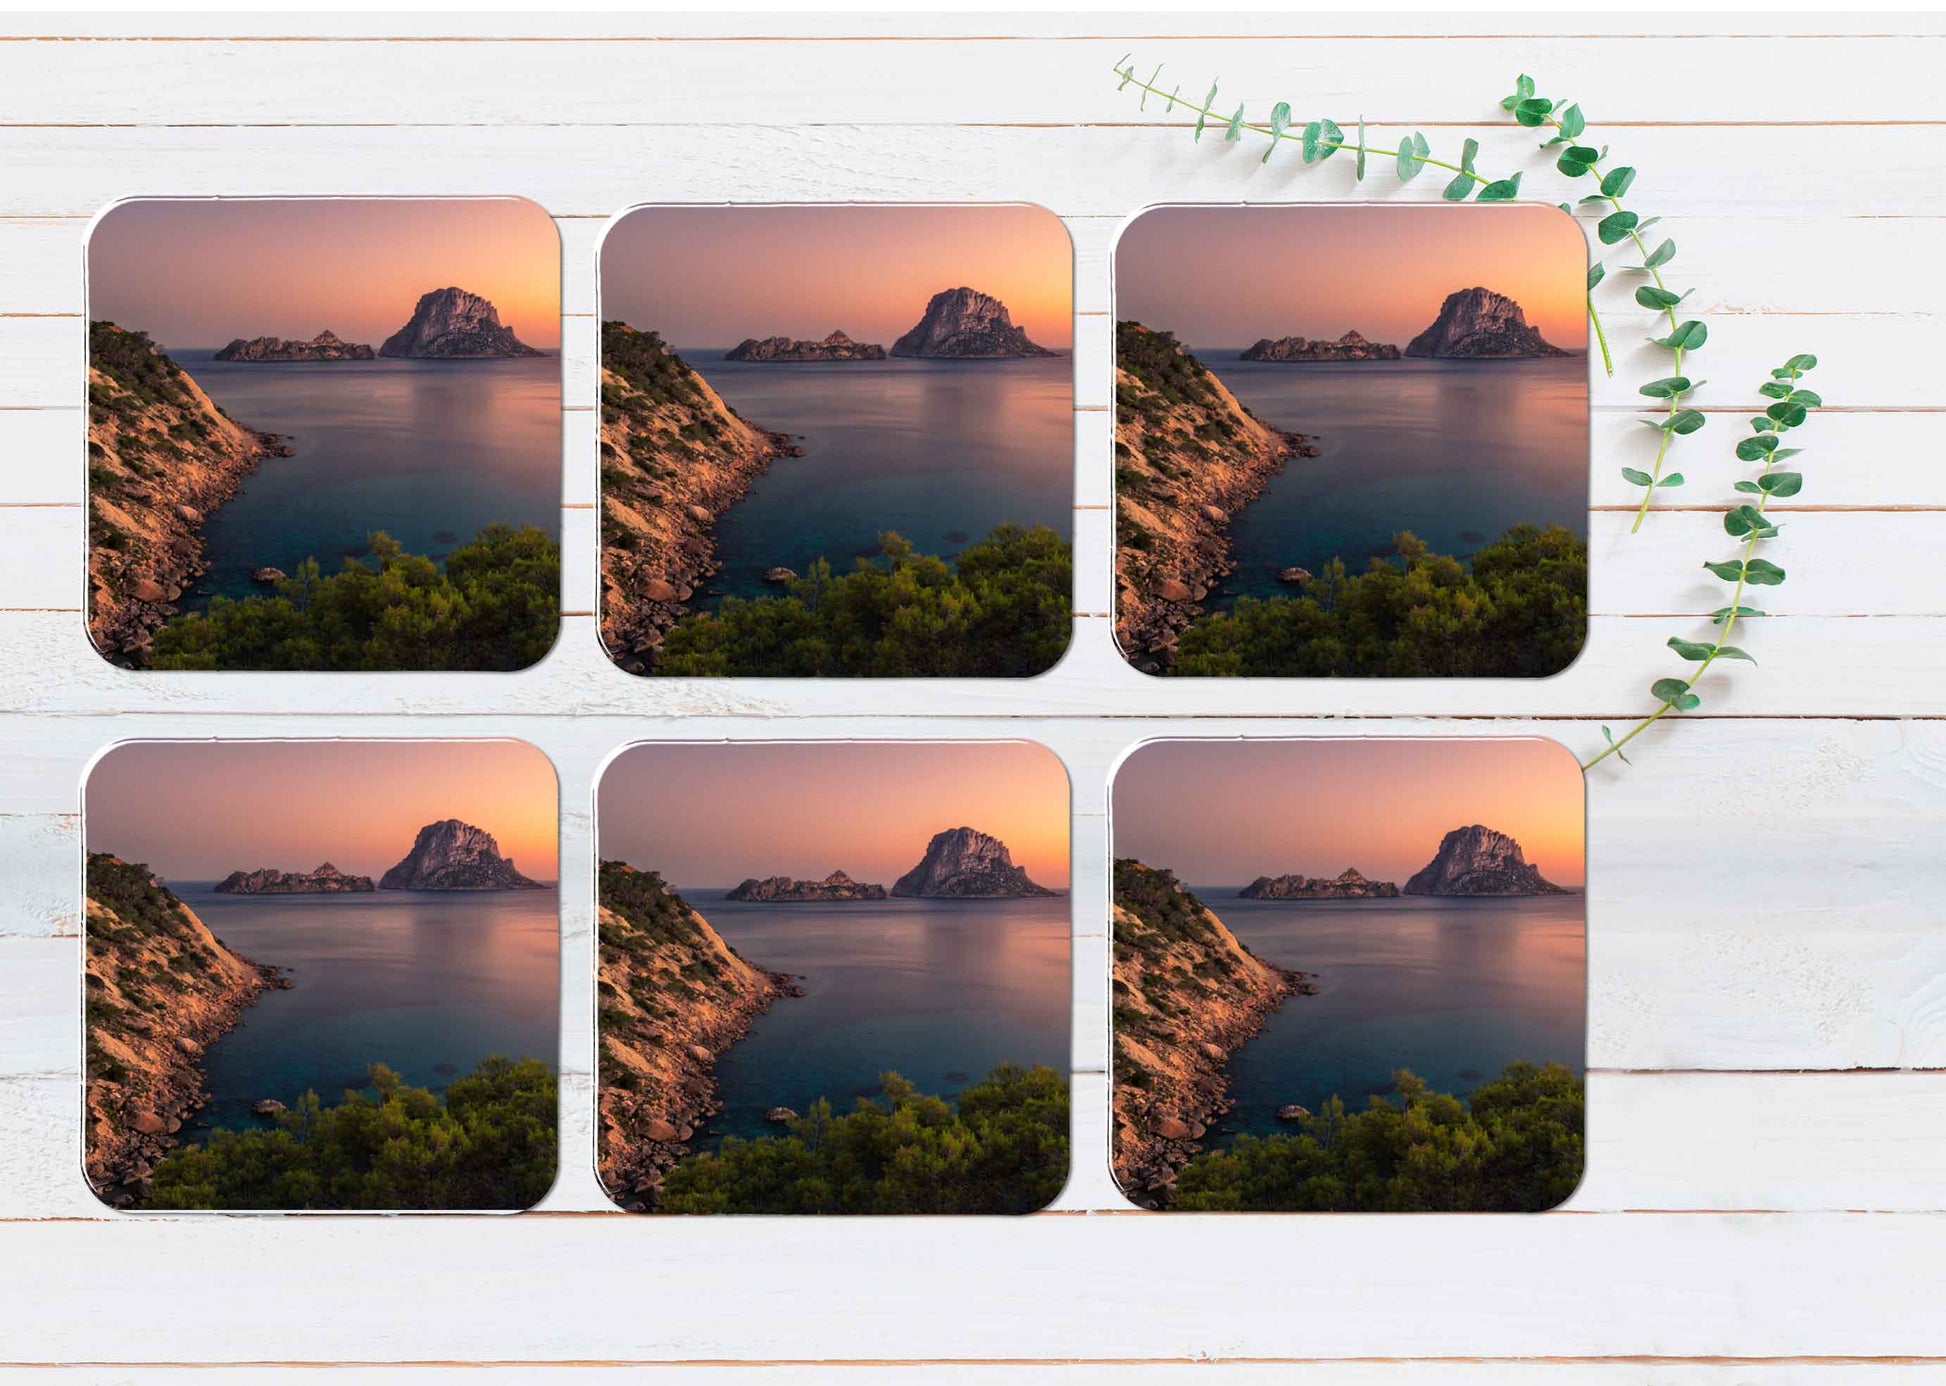 Relaxing Mediterranean Sea in Ibiza Coasters Wood & Rubber - Set of 6 Coasters